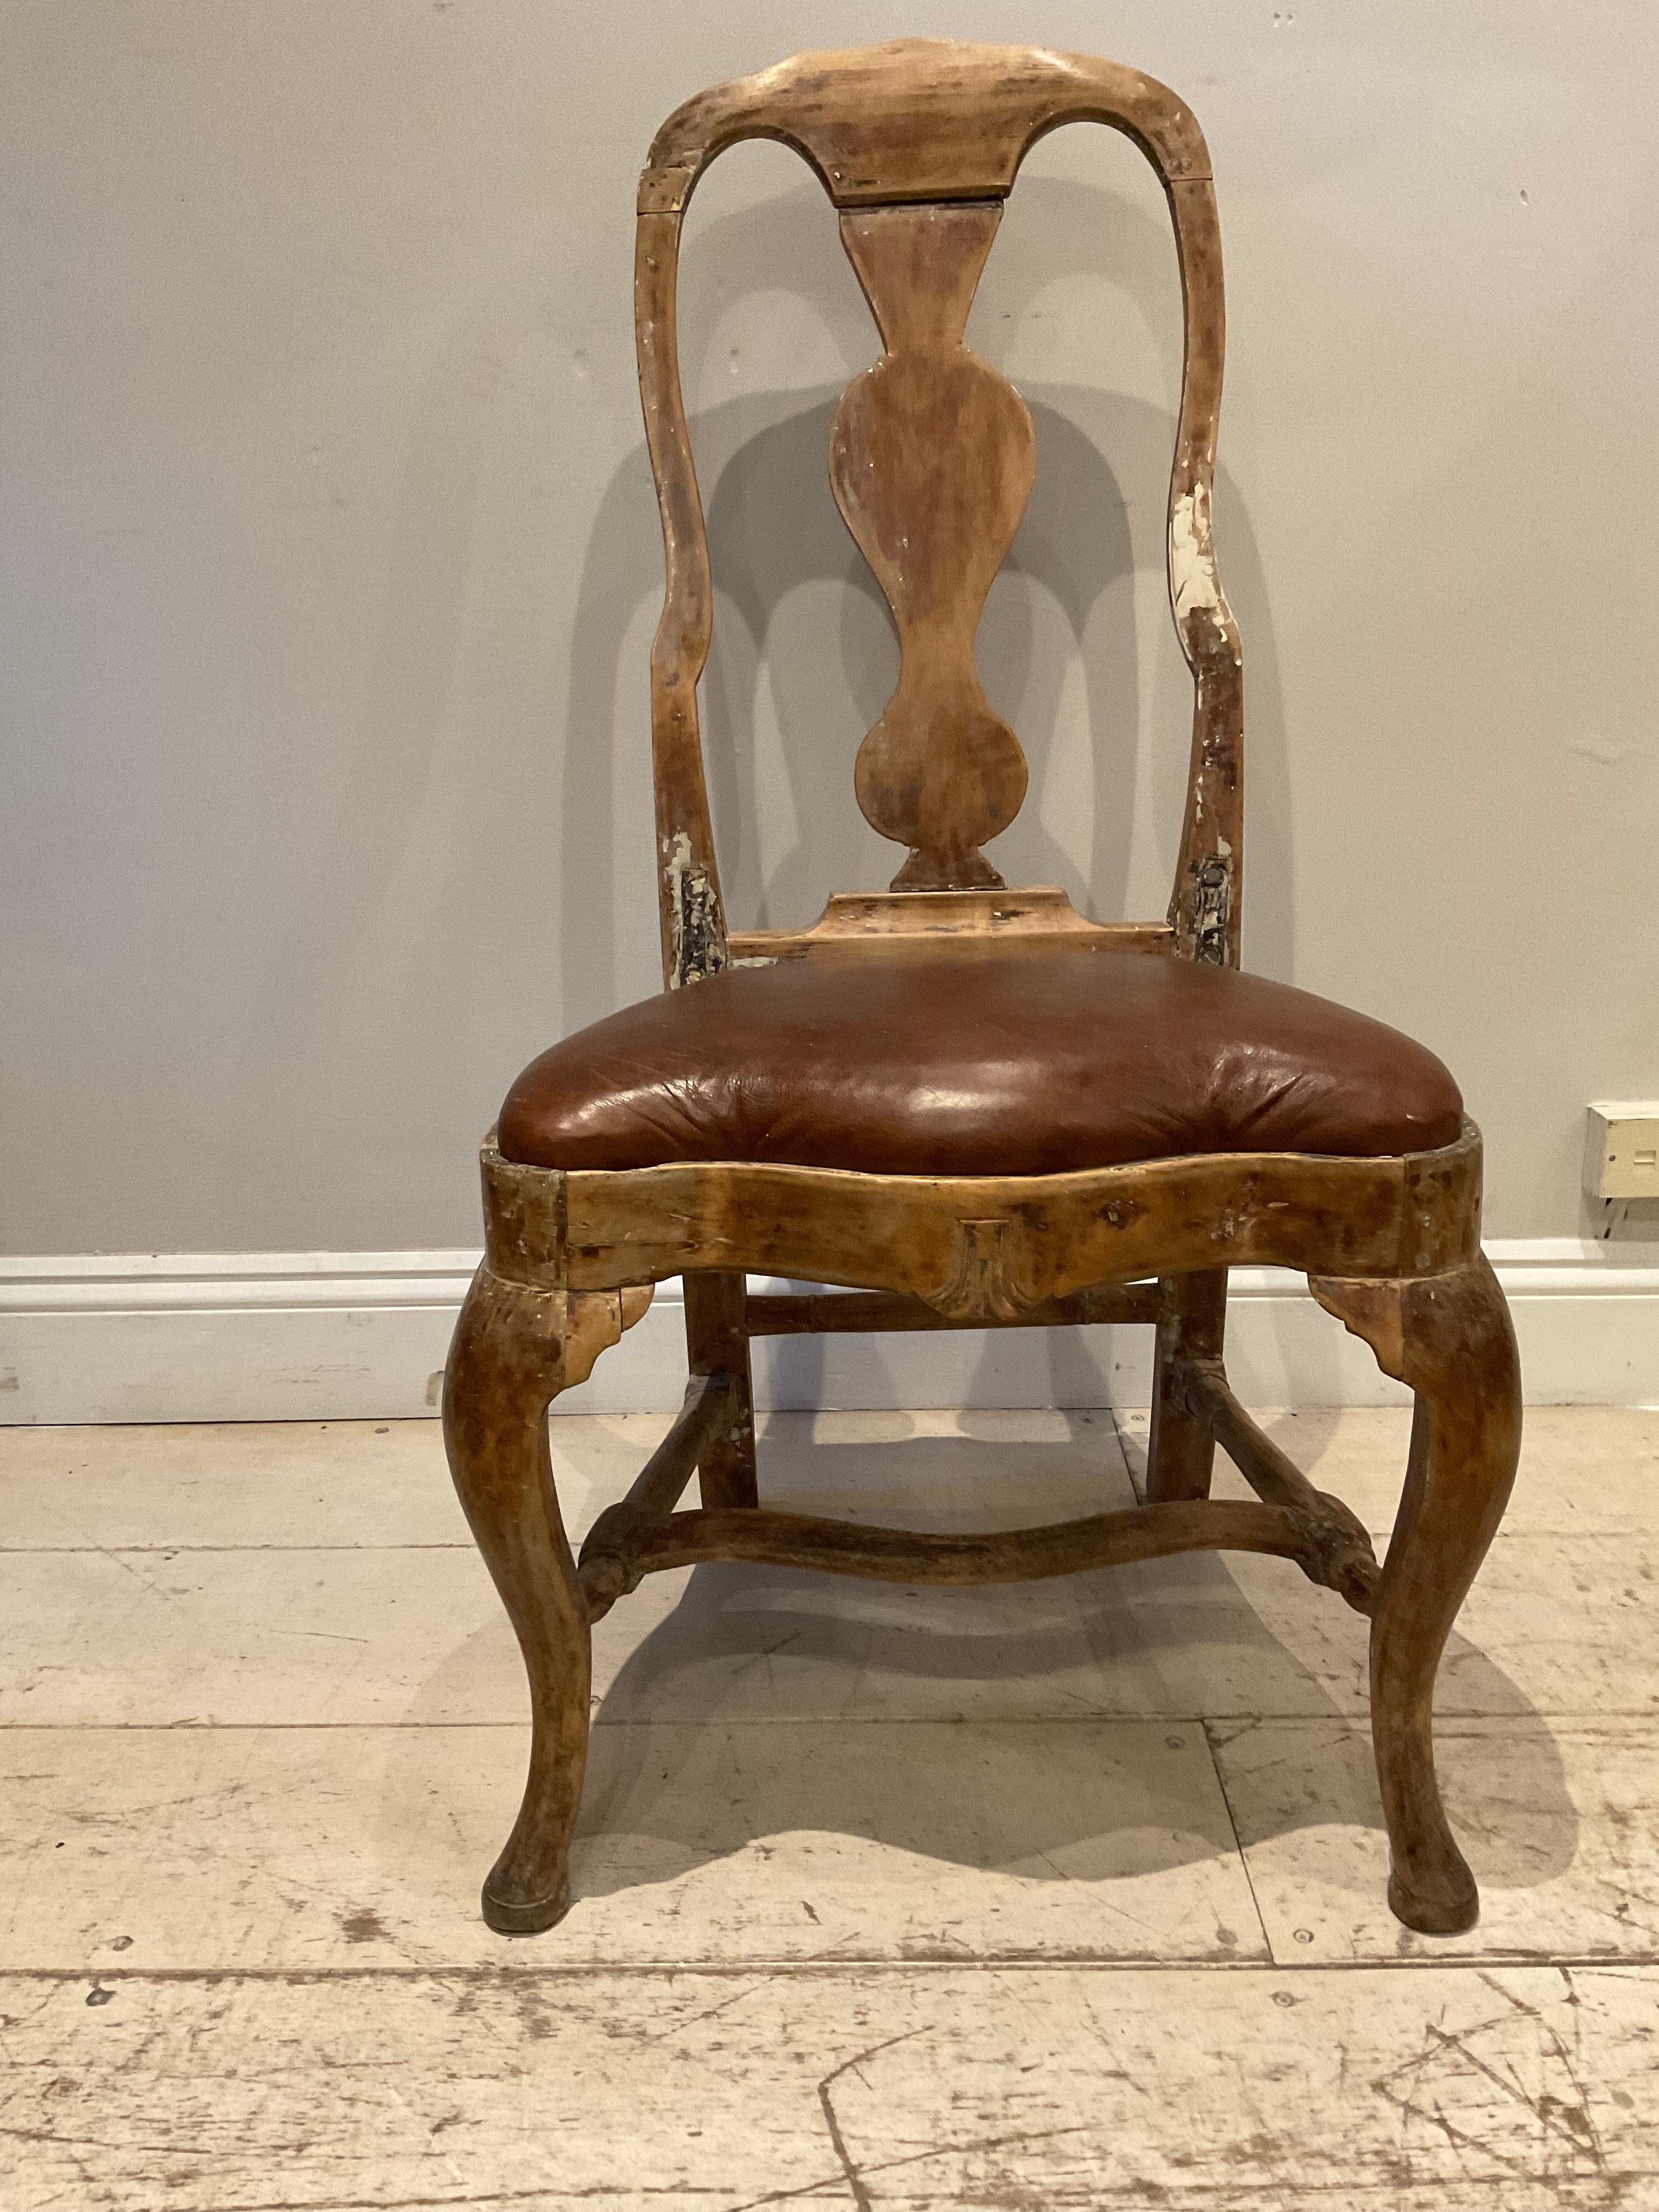 Carved Late 18th Century High Backed Swedish Chair with Leather Seat For Sale